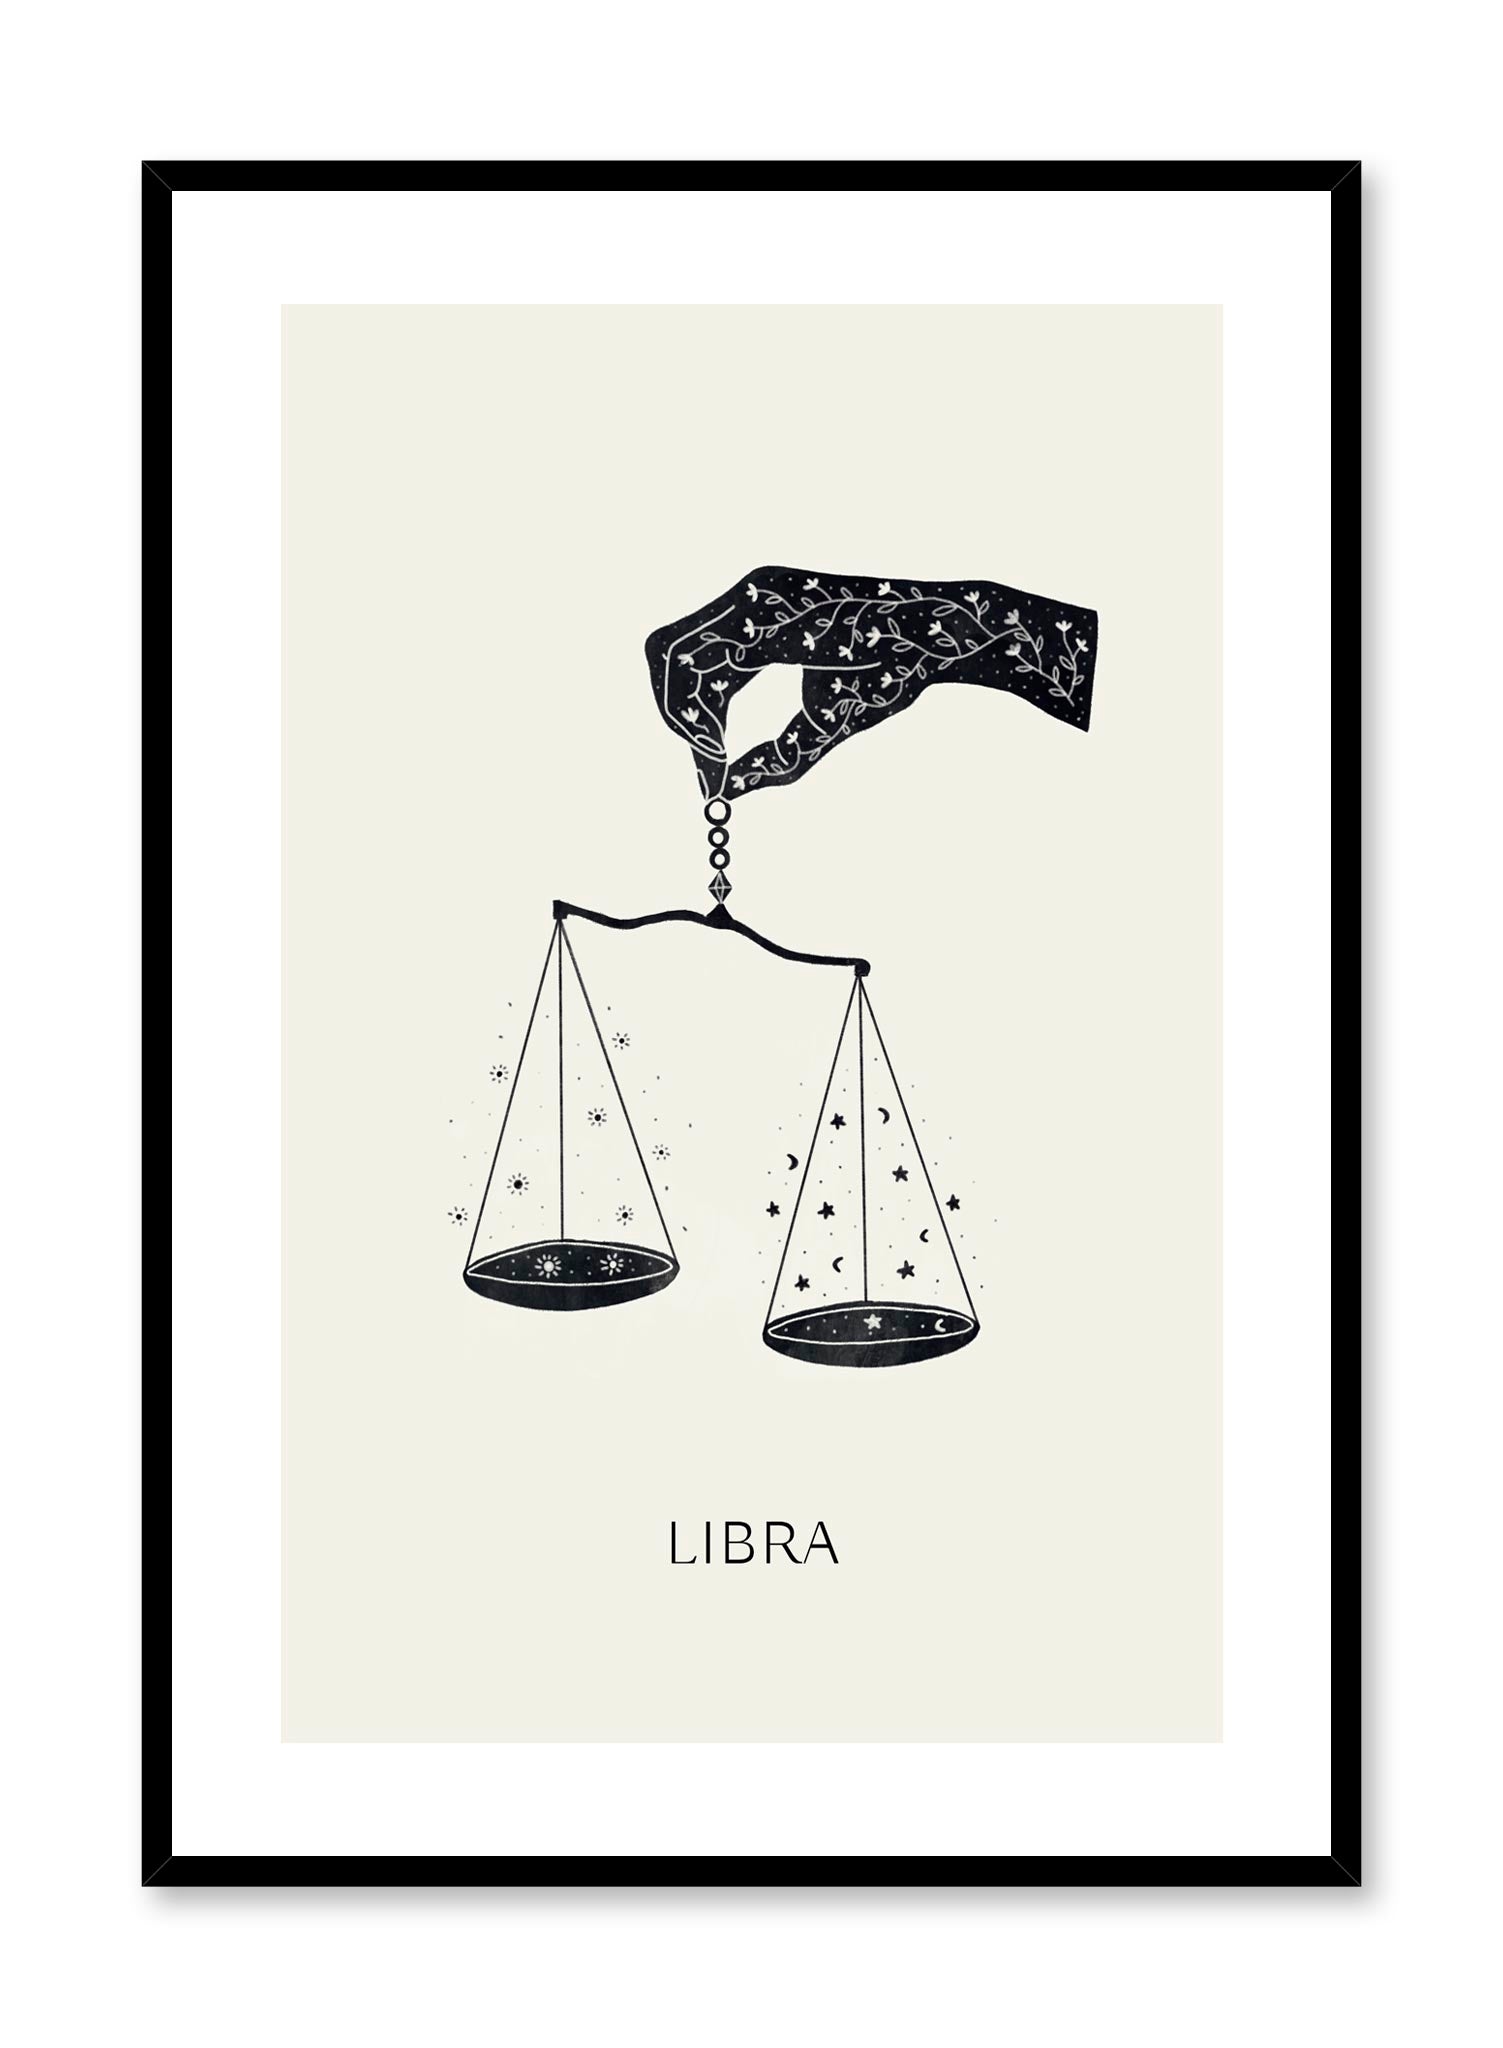 Celestial illustration poster by Opposite Wall with horoscope zodiac symbol of Libra